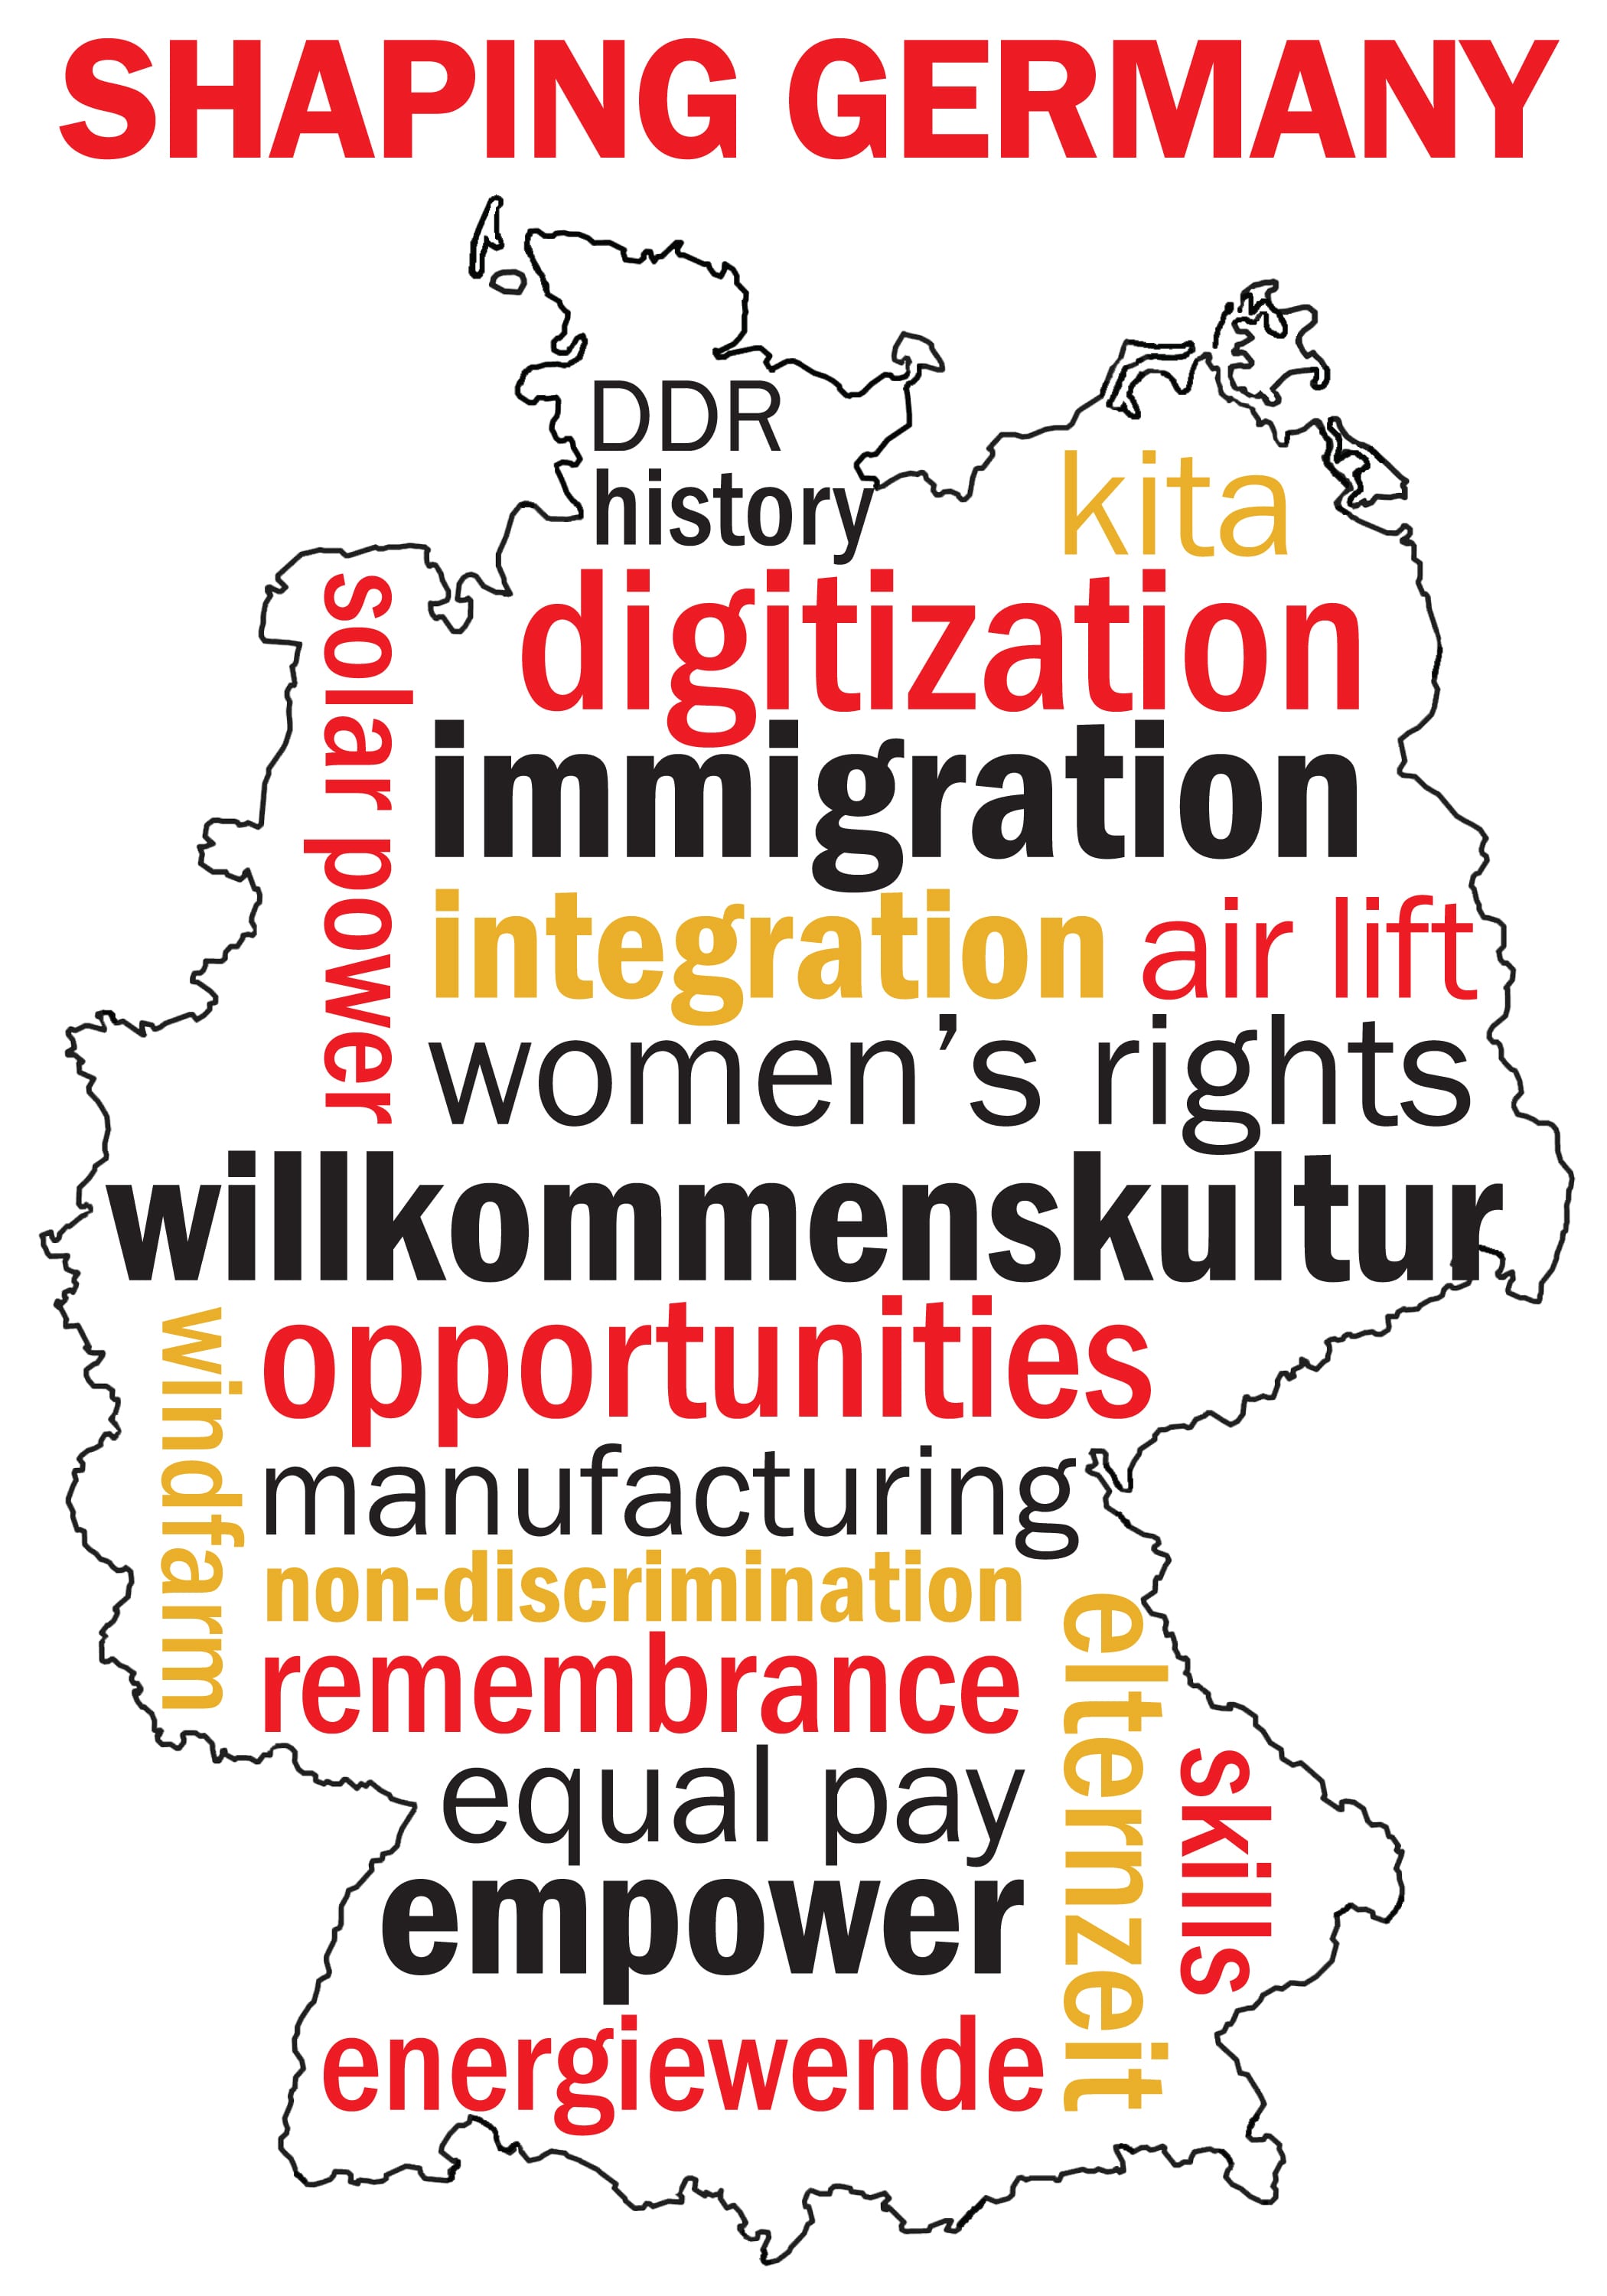 An outline of Germany containing a word cloud describing current social and political issues.